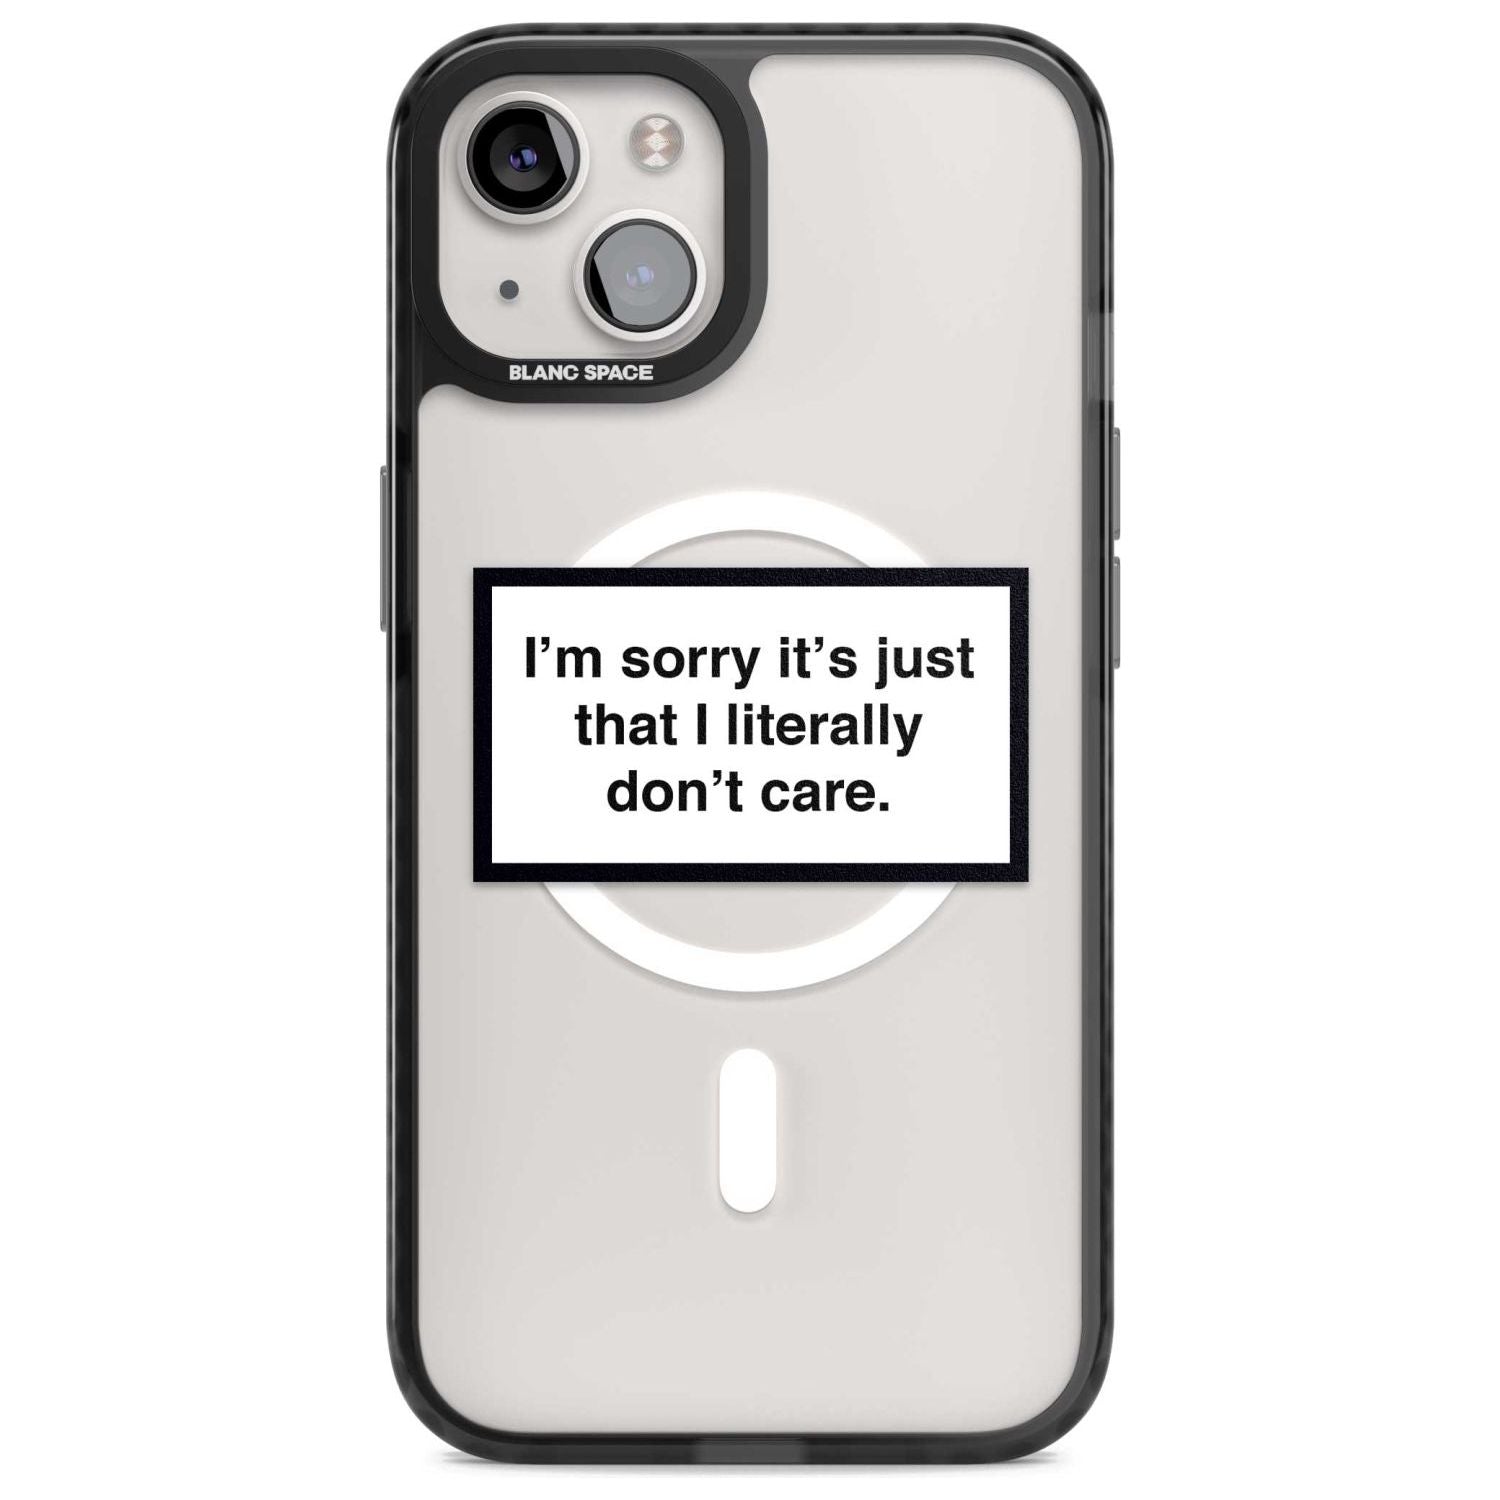 I Literally Don't Care Phone Case iPhone 15 Plus / Magsafe Black Impact Case,iPhone 15 / Magsafe Black Impact Case,iPhone 14 Plus / Magsafe Black Impact Case,iPhone 14 / Magsafe Black Impact Case,iPhone 13 / Magsafe Black Impact Case Blanc Space